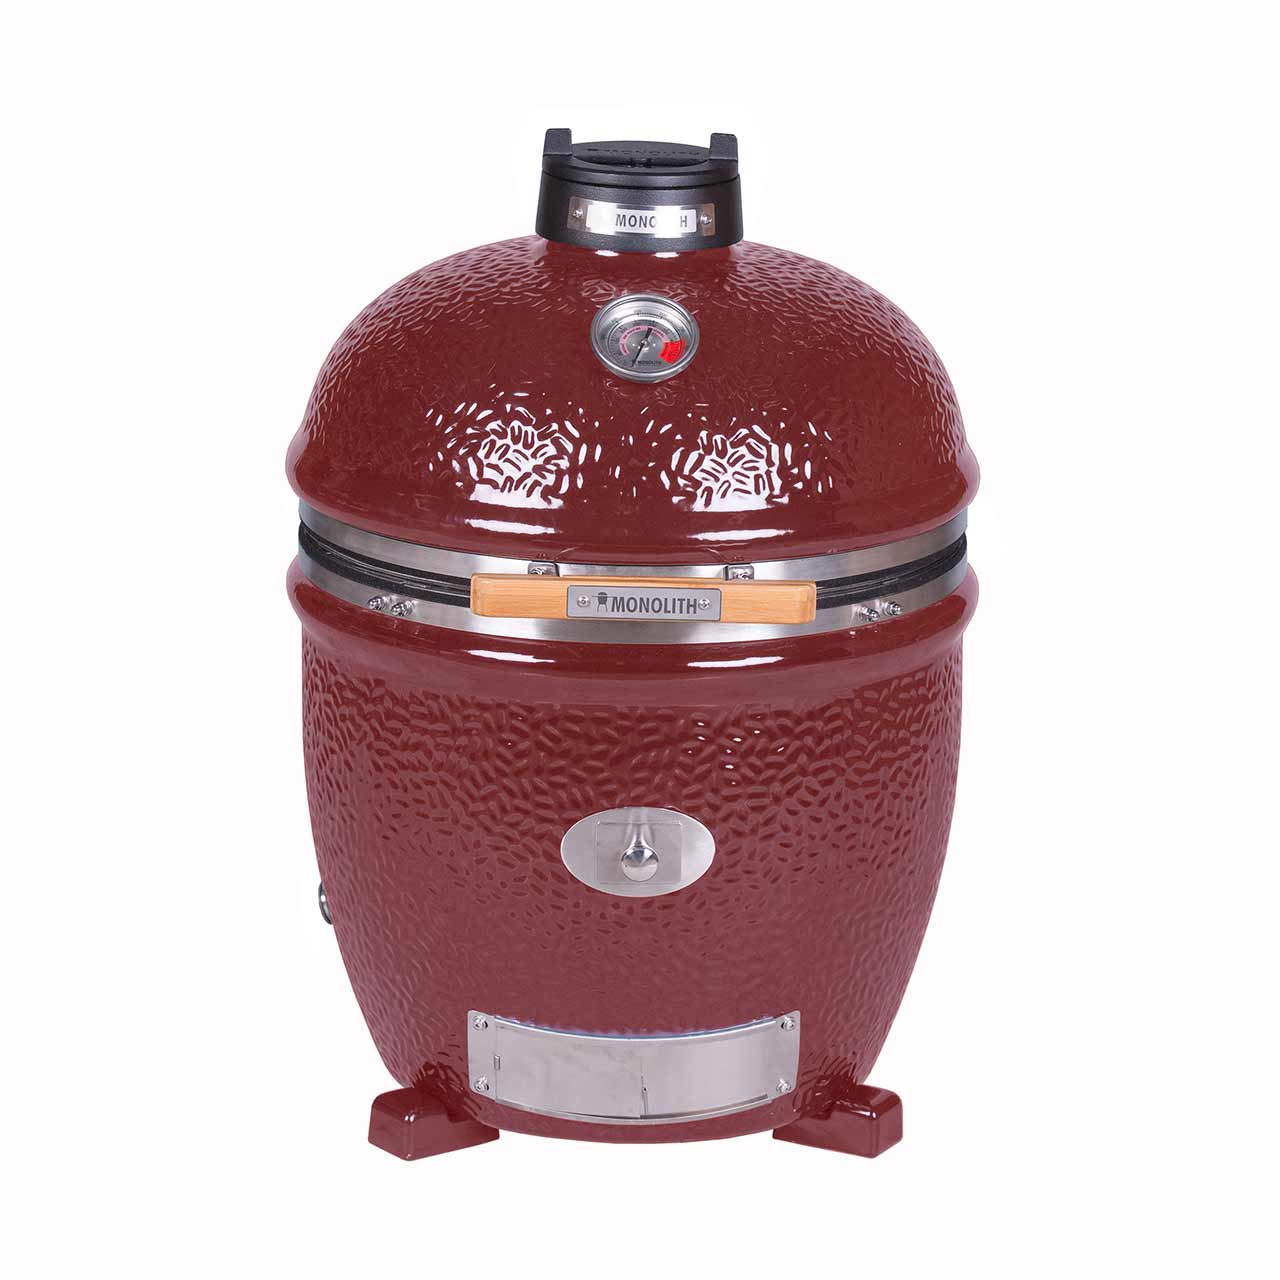 Monolith Kamado Grill Classic Pro-Serie 2.0 – RED ohne Gestell